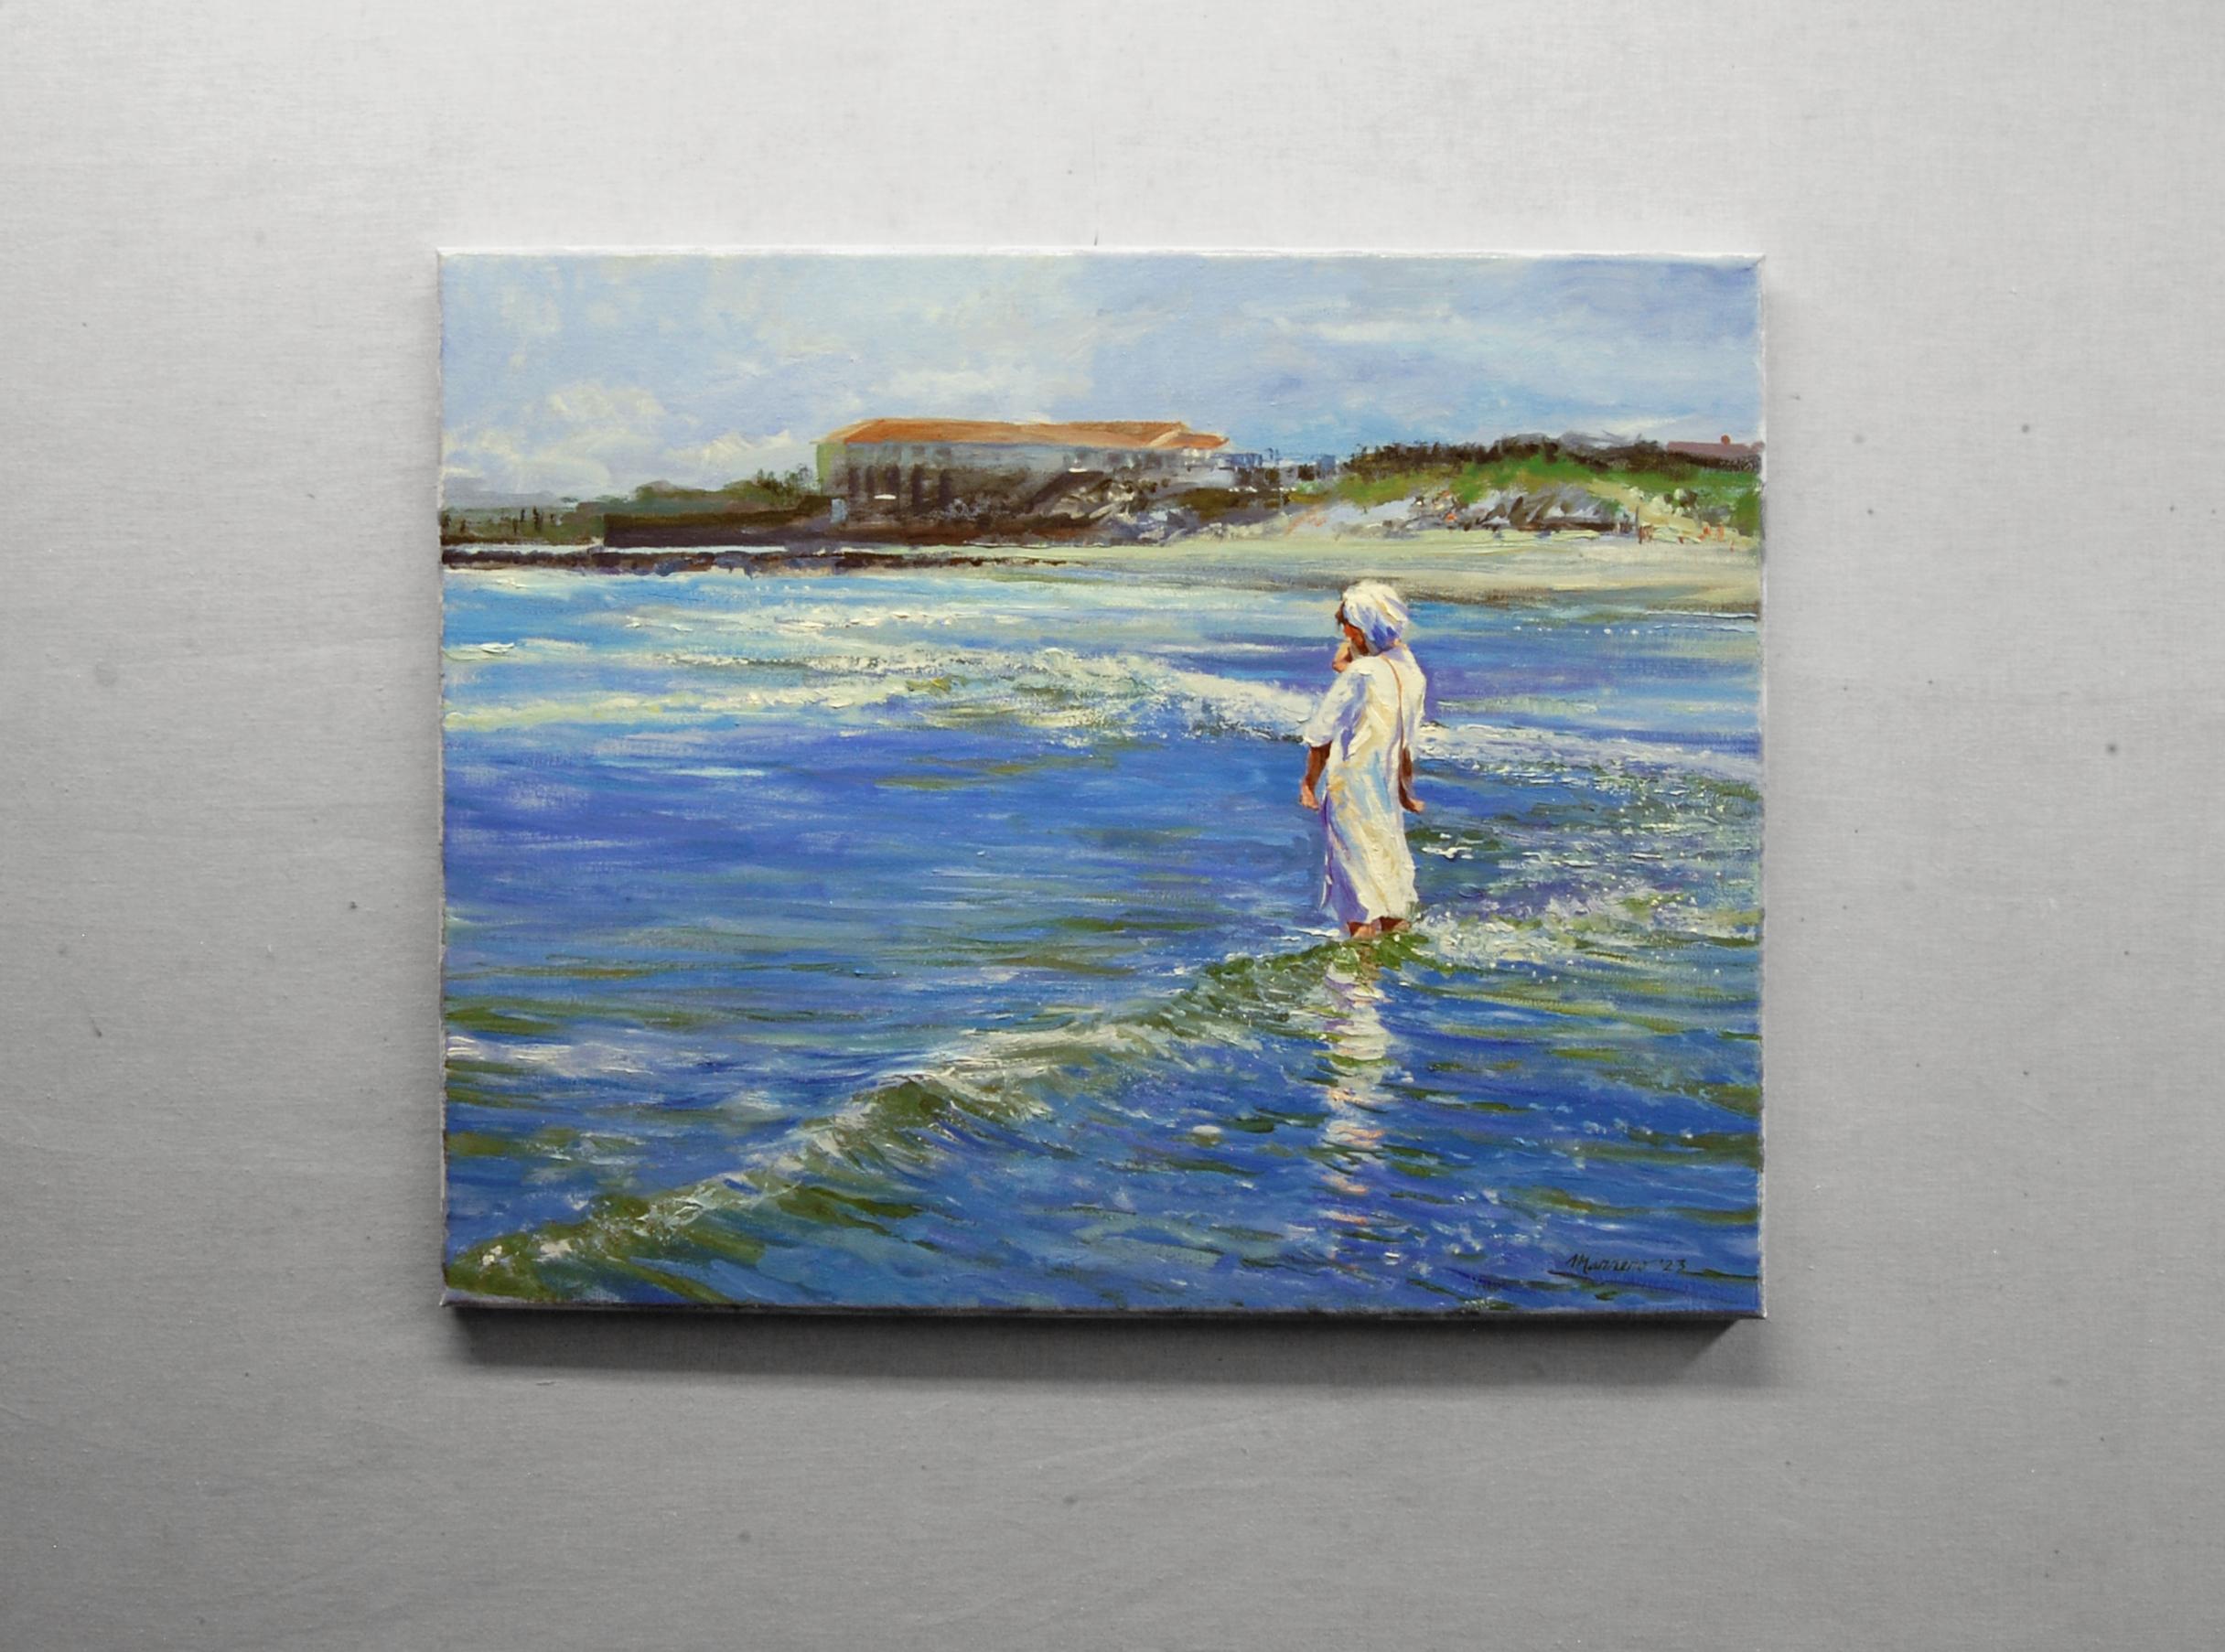 <p>Artist Comments<br>Artist Onelio Marrero captures a gentle moment of a Hasidic mother and her child enjoying the surf as the tide rolled in. While out on the New Jersey seashore, Onelio catches this tender sight, relishing in the refreshing